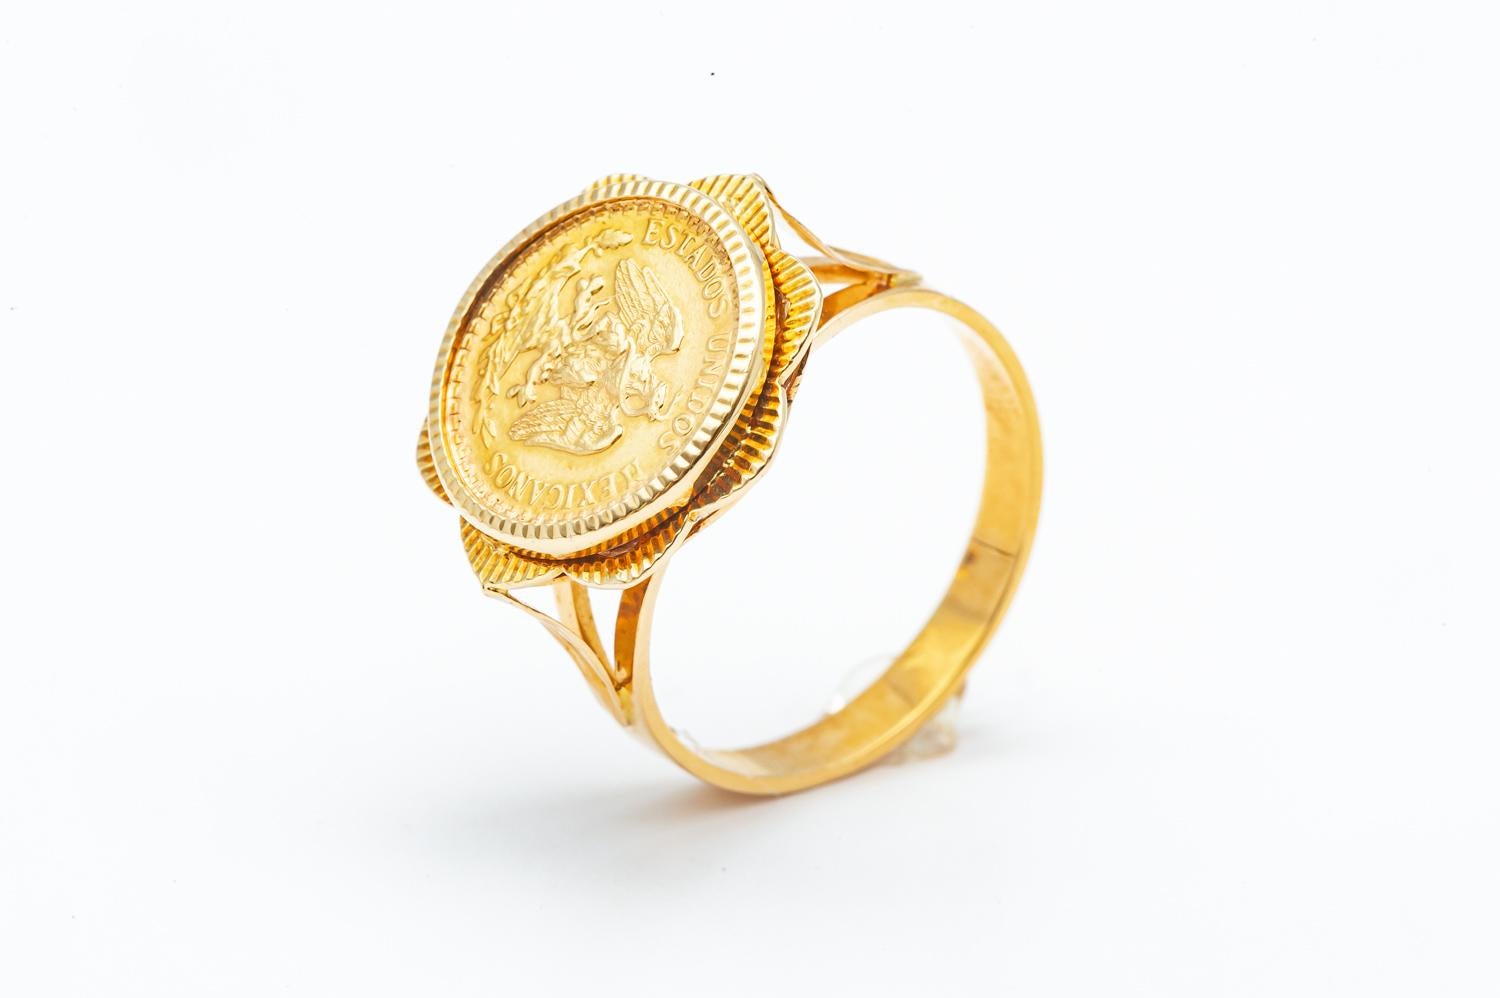 Discover our exceptional 18K Yellow Gold ring, a true historical and artistic treasure, celebrating the numismatic heritage of the United Mexican States.

This ring is a testimony to the meticulous craftsmanship of our jewelers, who were able to